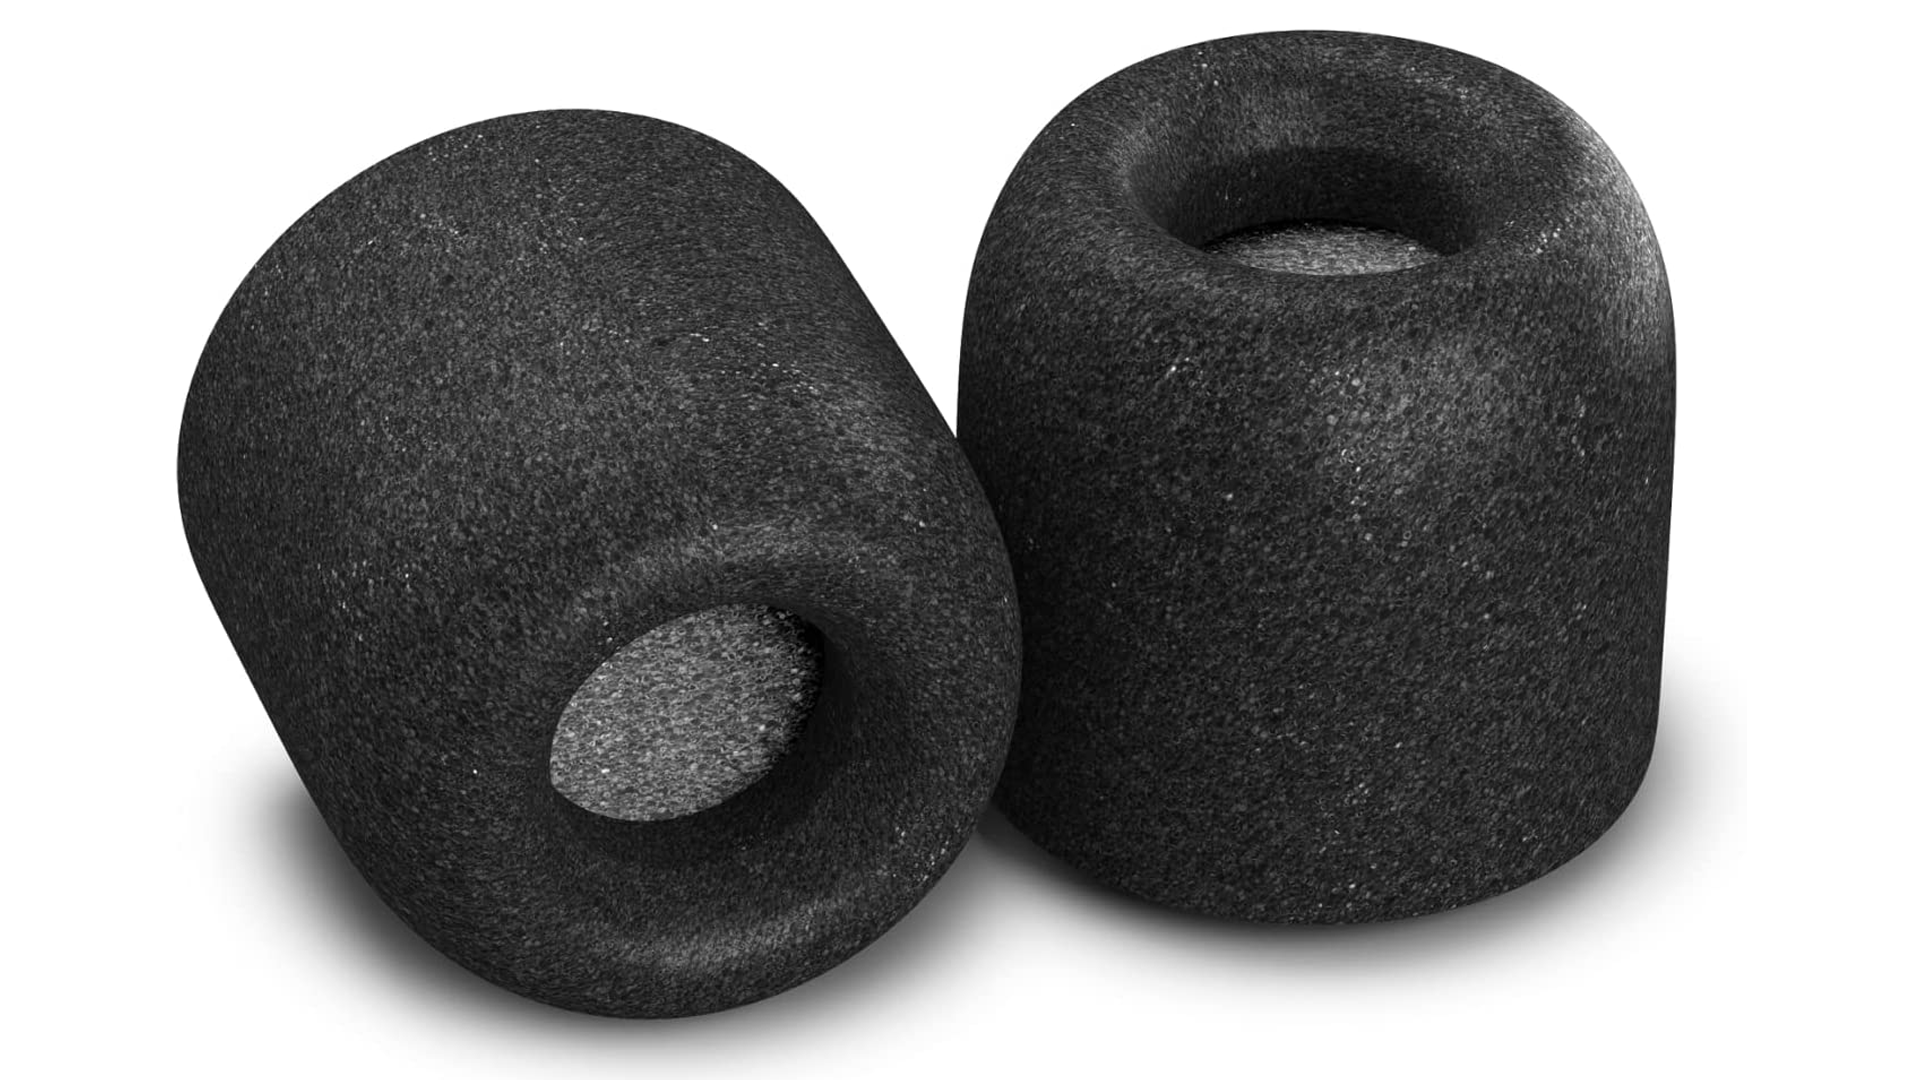 The Comply Isolation Plus TX-500 memory foam earbud tips in Medium